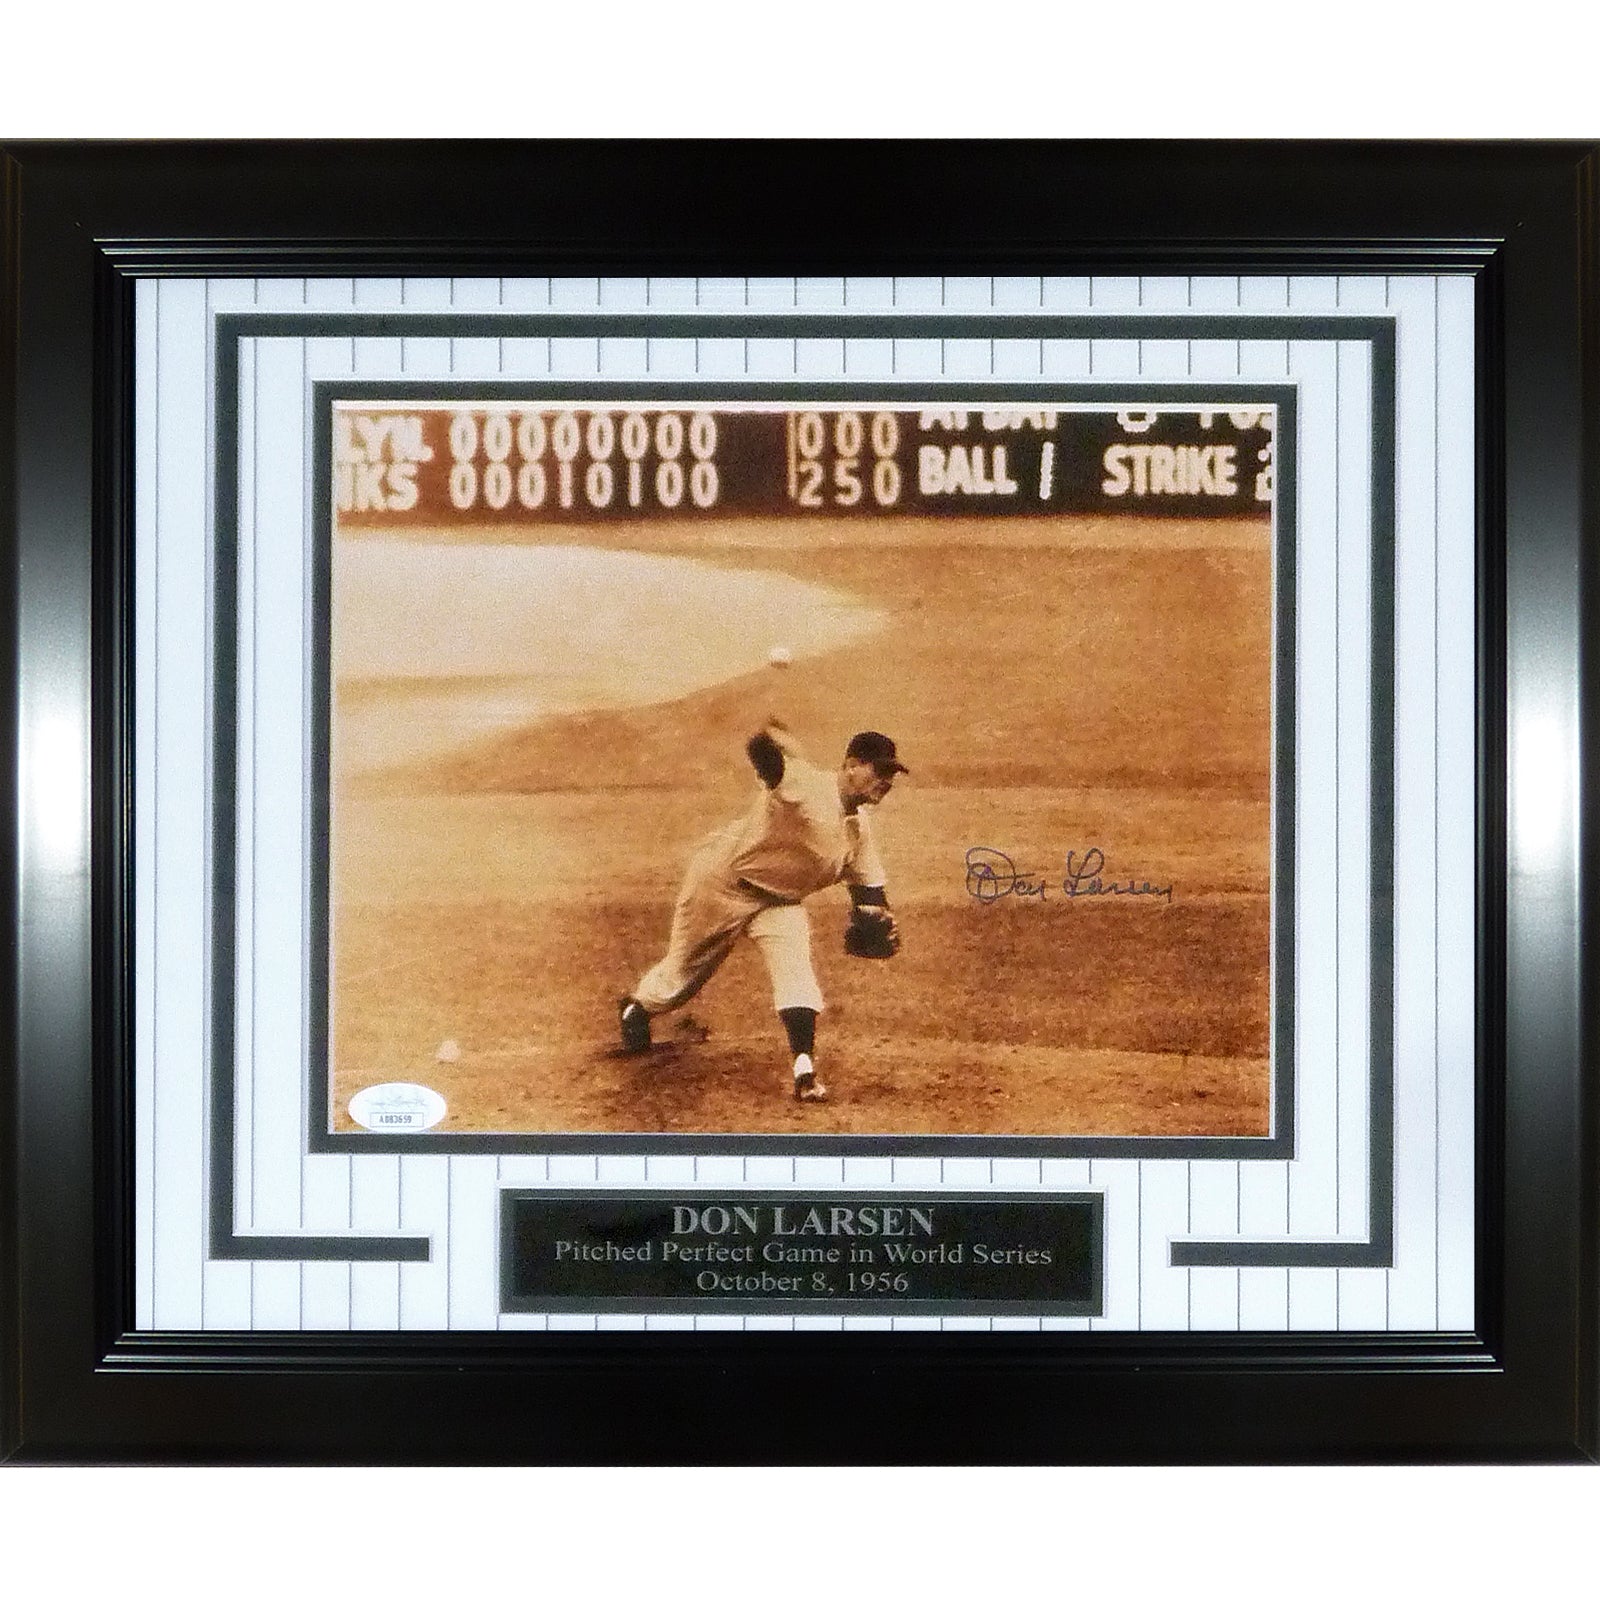 Don Larsen Autographed New York Yankees (Perfect Game) Framed 8x10 Photo